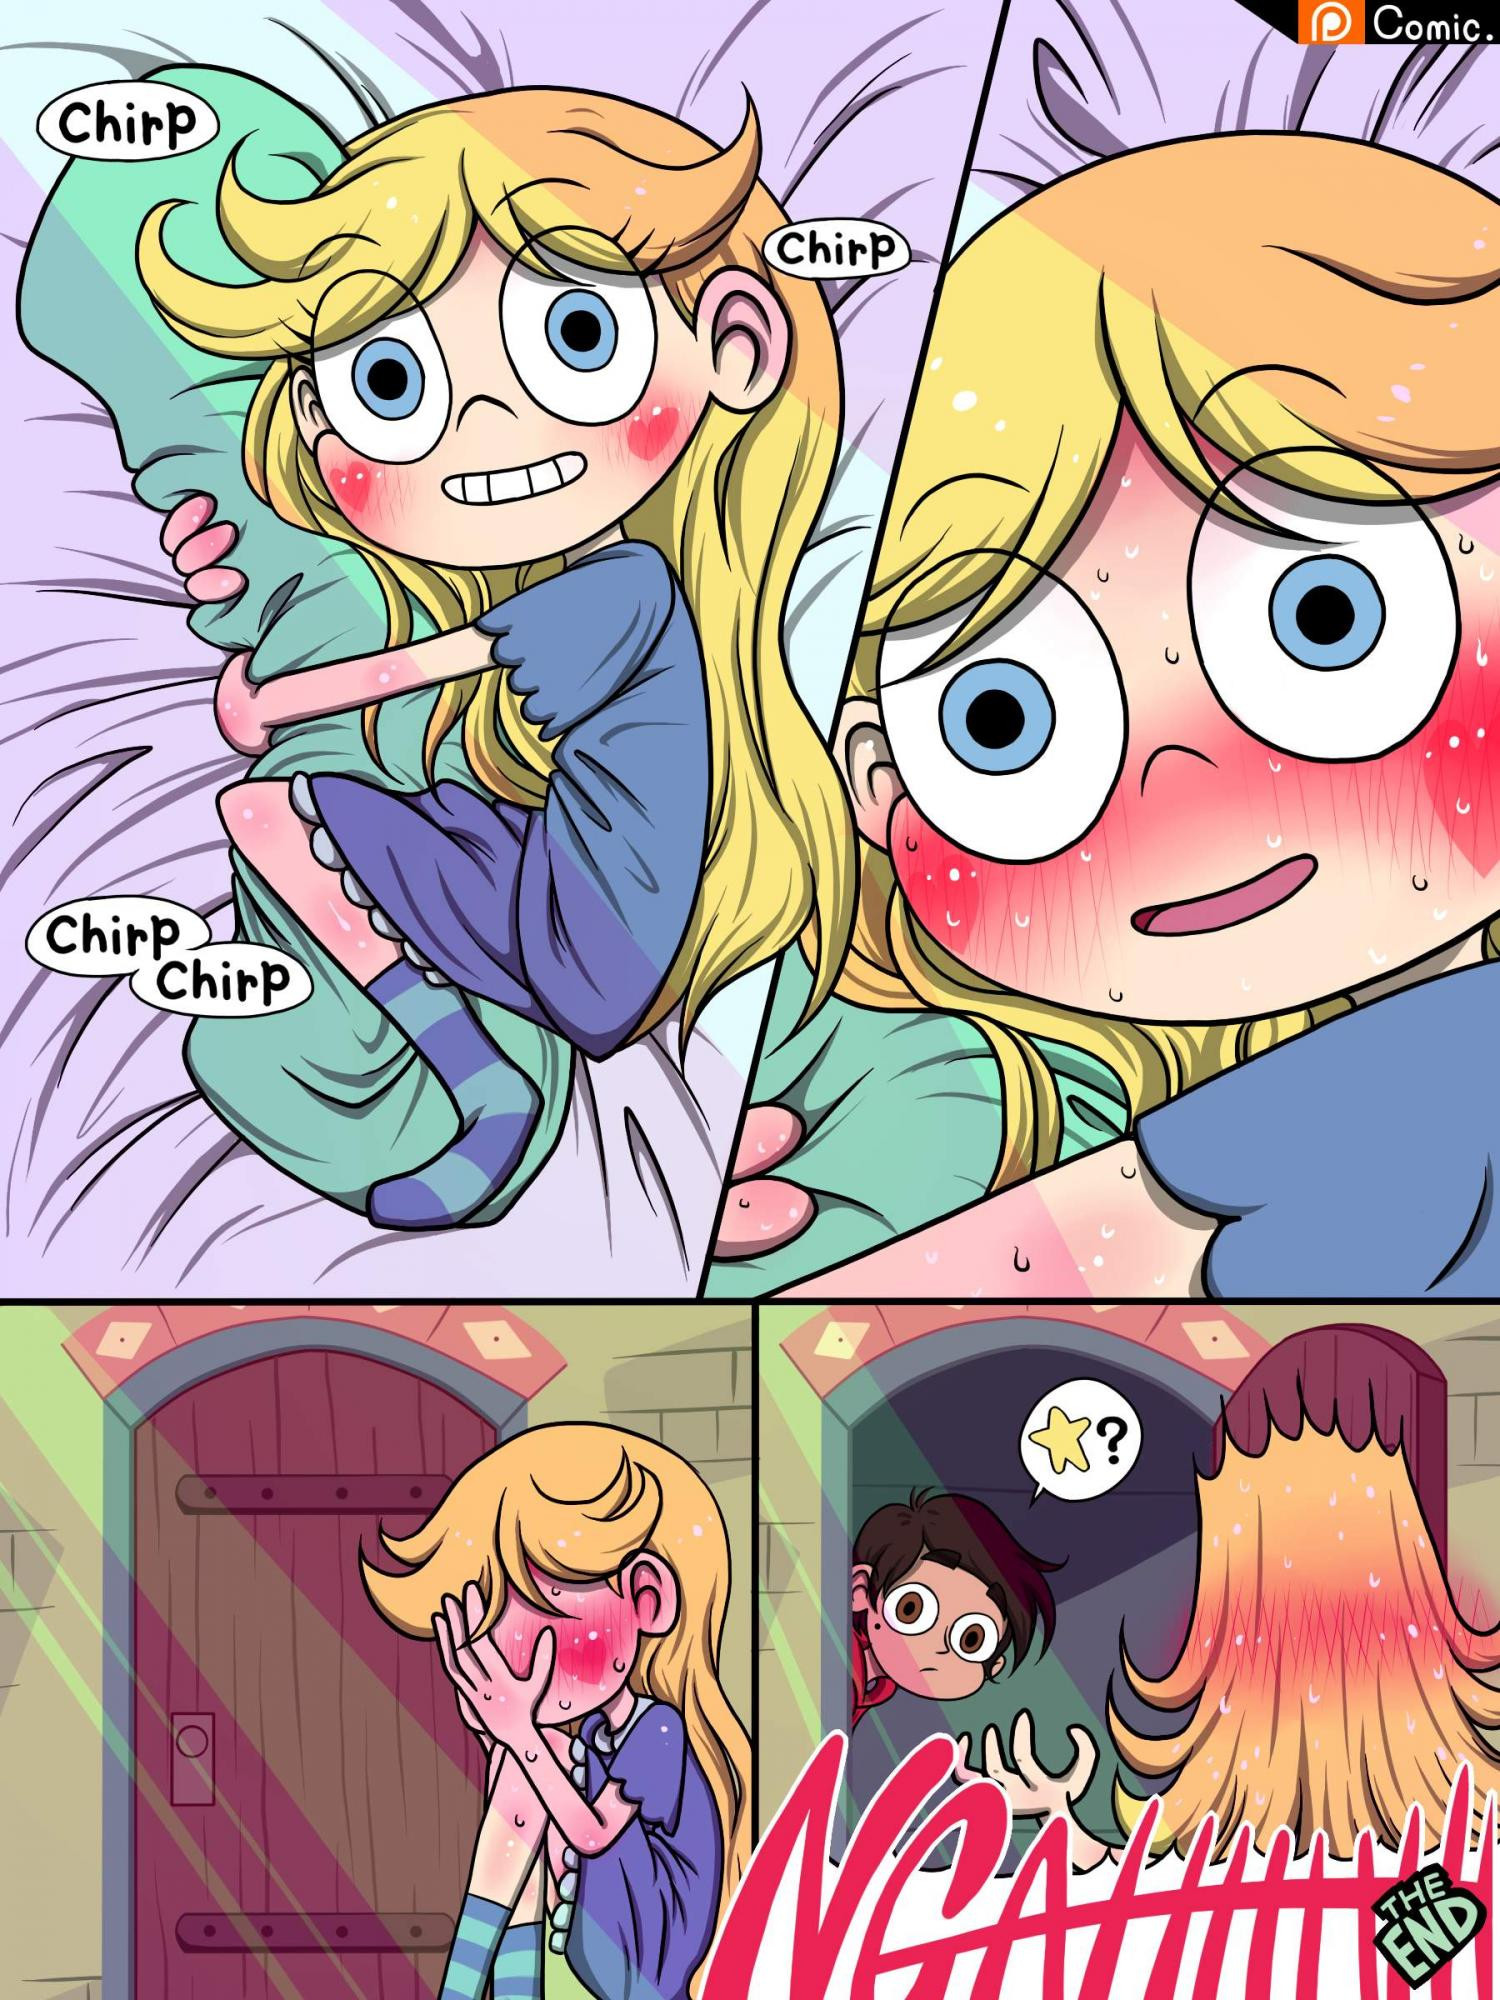 [Zat] Star Vs The Forces Of Evil – Foces of Dream - 7